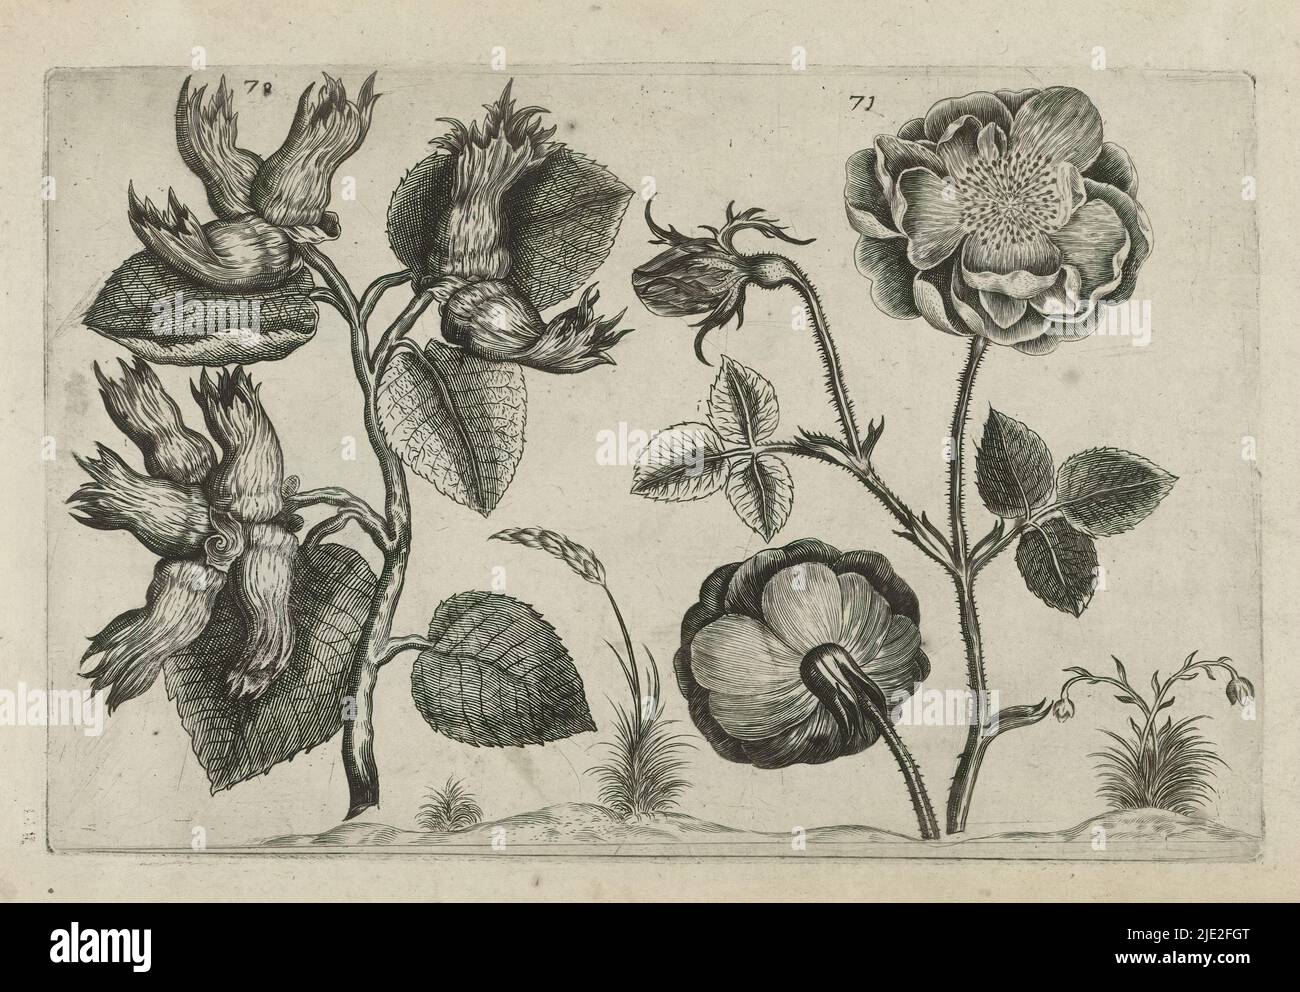 Hazel and rose, Cognoscite lilia (series title), Hazel (Corylus avellana) and rose, numbered 70 and 71., print maker: Crispijn van de Passe (I), (attributed to), after drawing by: Crispijn van de Passe (I), (attributed to), publisher: Crispijn van de Passe (I), print maker: Cologne, after drawing by: Cologne, publisher: Cologne, publisher: London, 1600 - 1604, paper, engraving, height 127 mm × width 205 mm, height 172 mm × width 272 mm Stock Photo